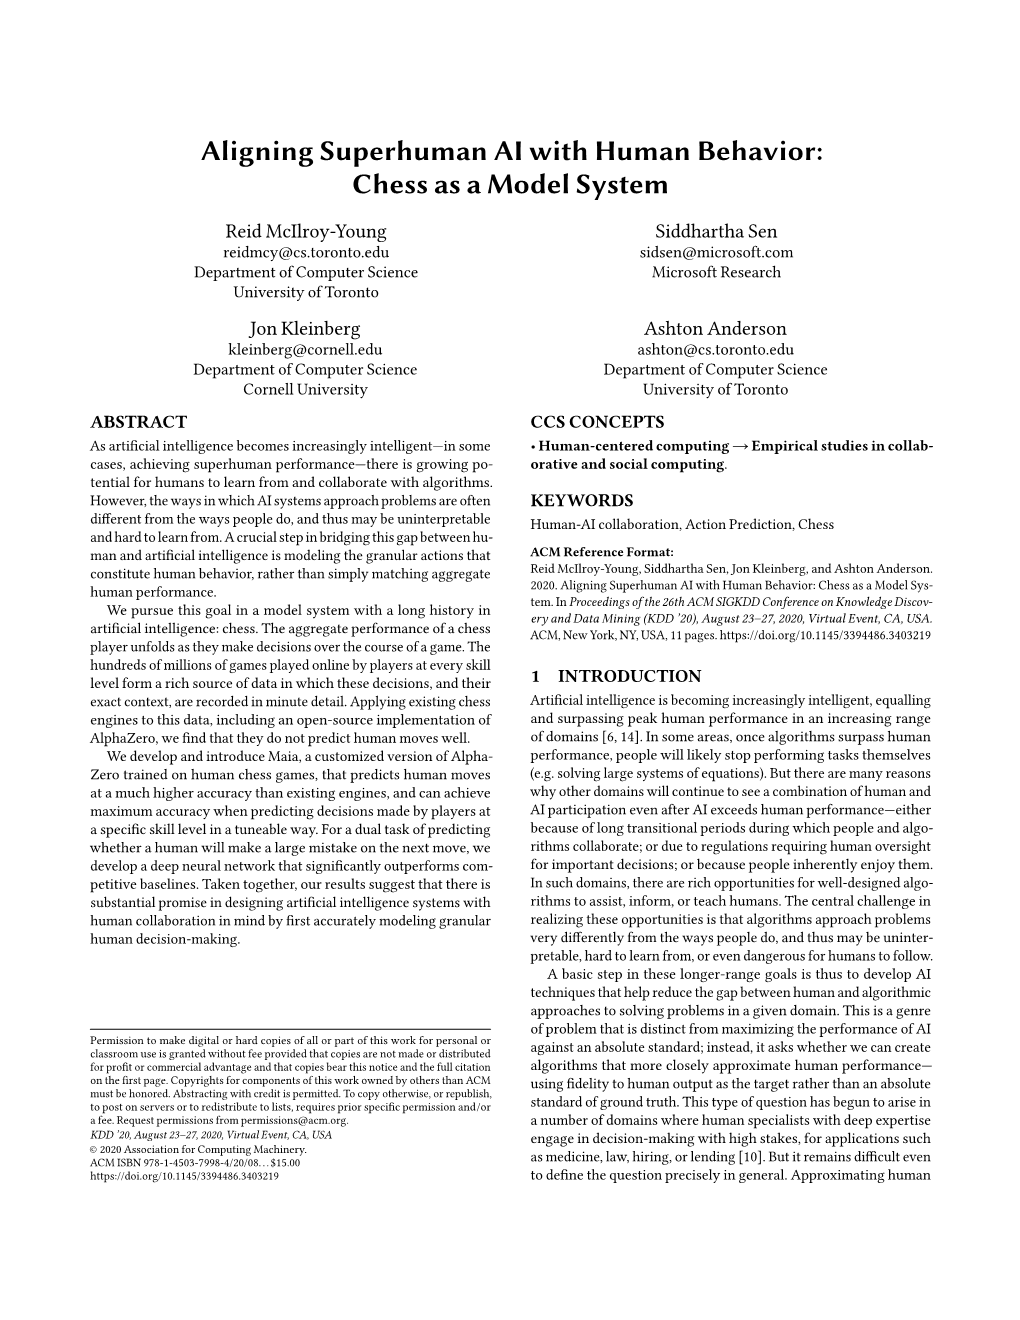 Aligning Superhuman AI with Human Behavior: Chess As a Model System